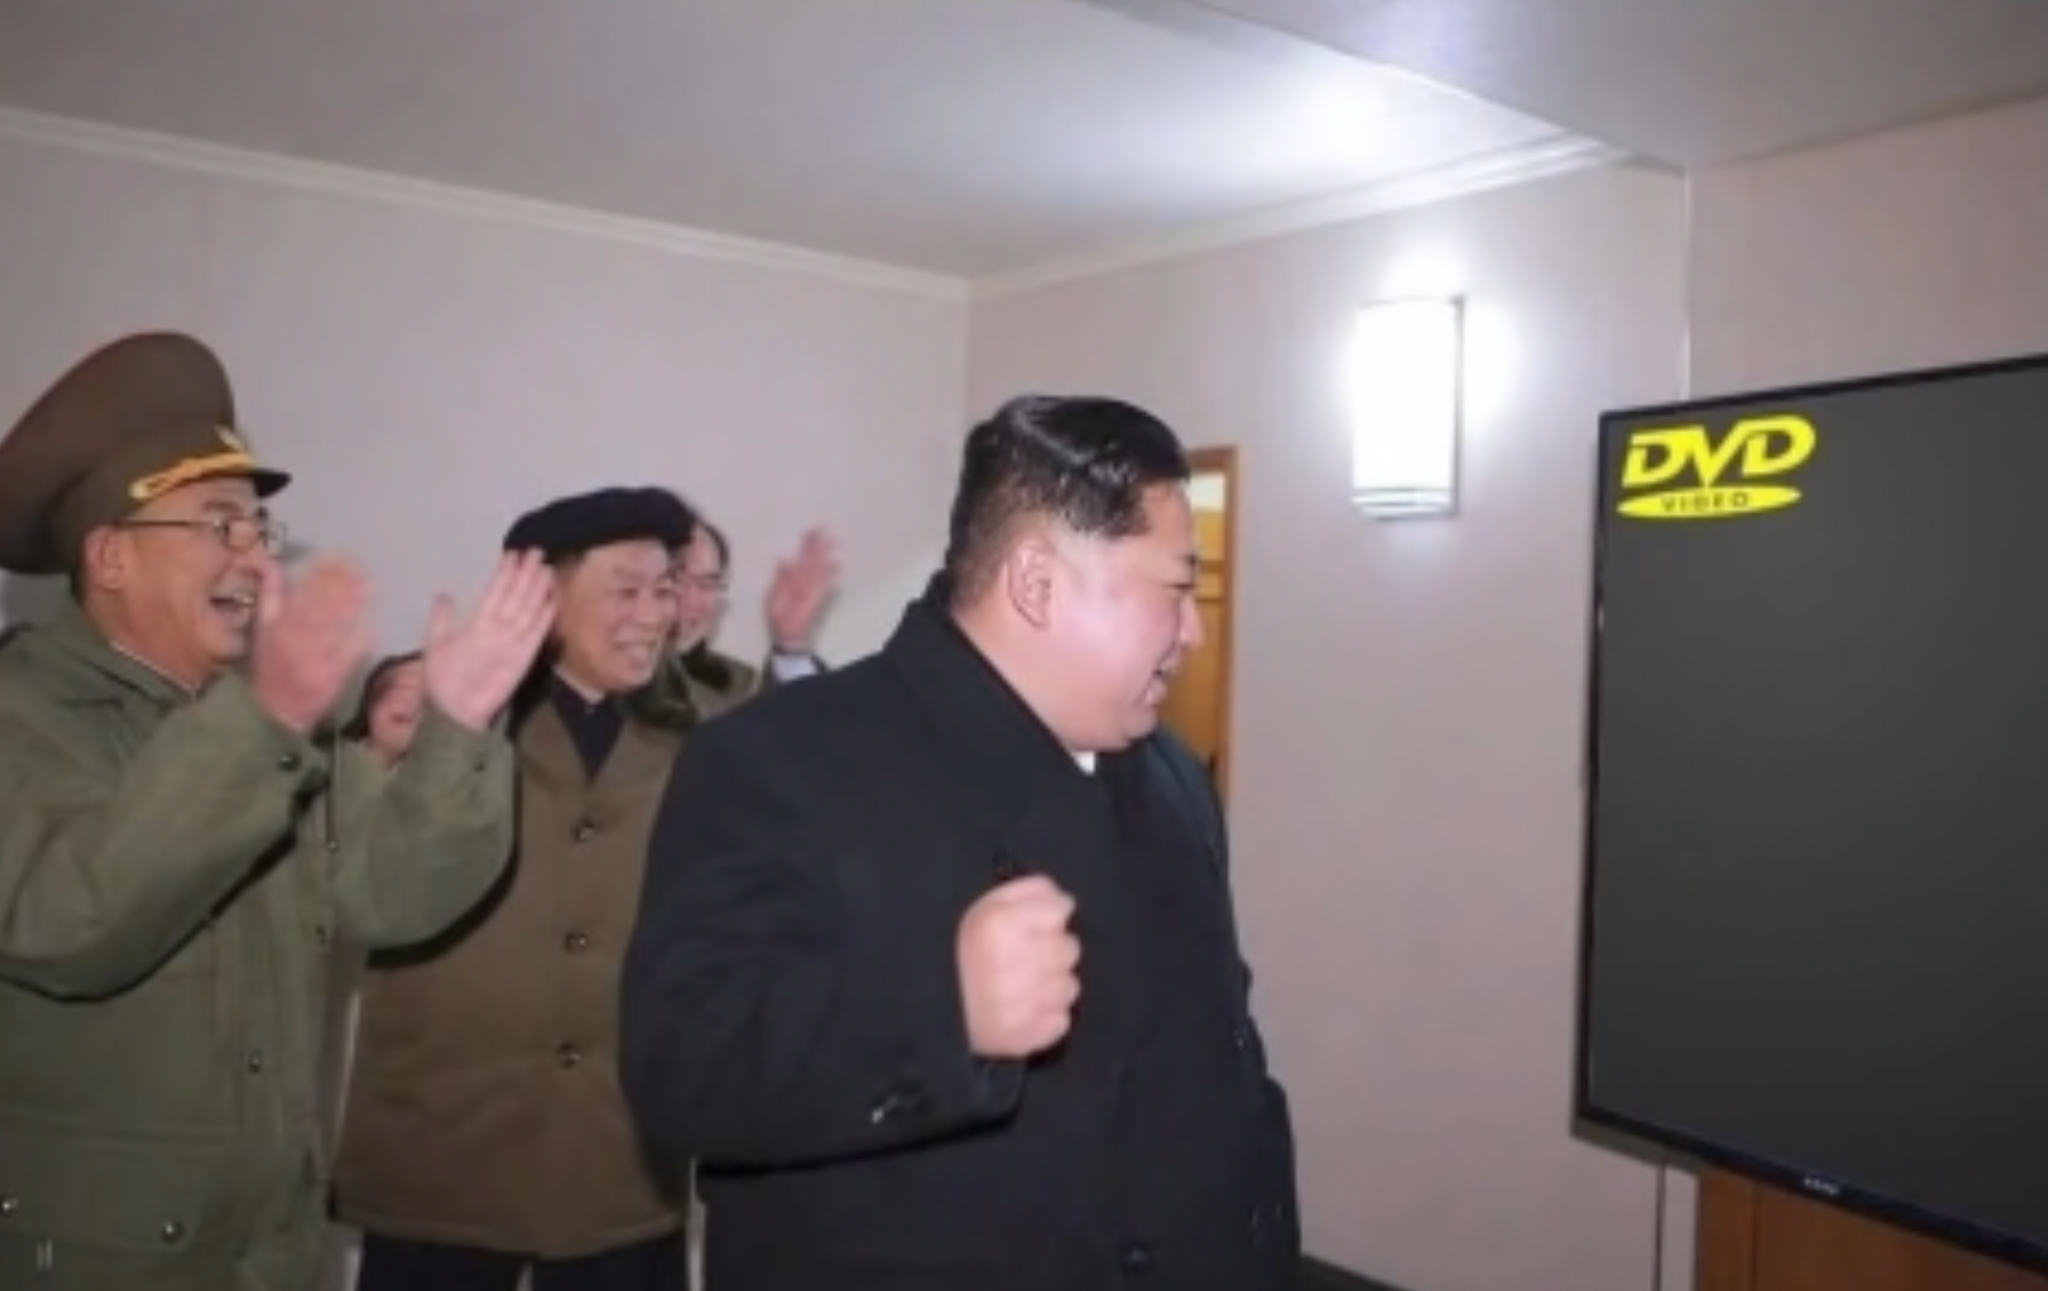 Kim Jong Un discovers a new device called television, 2014